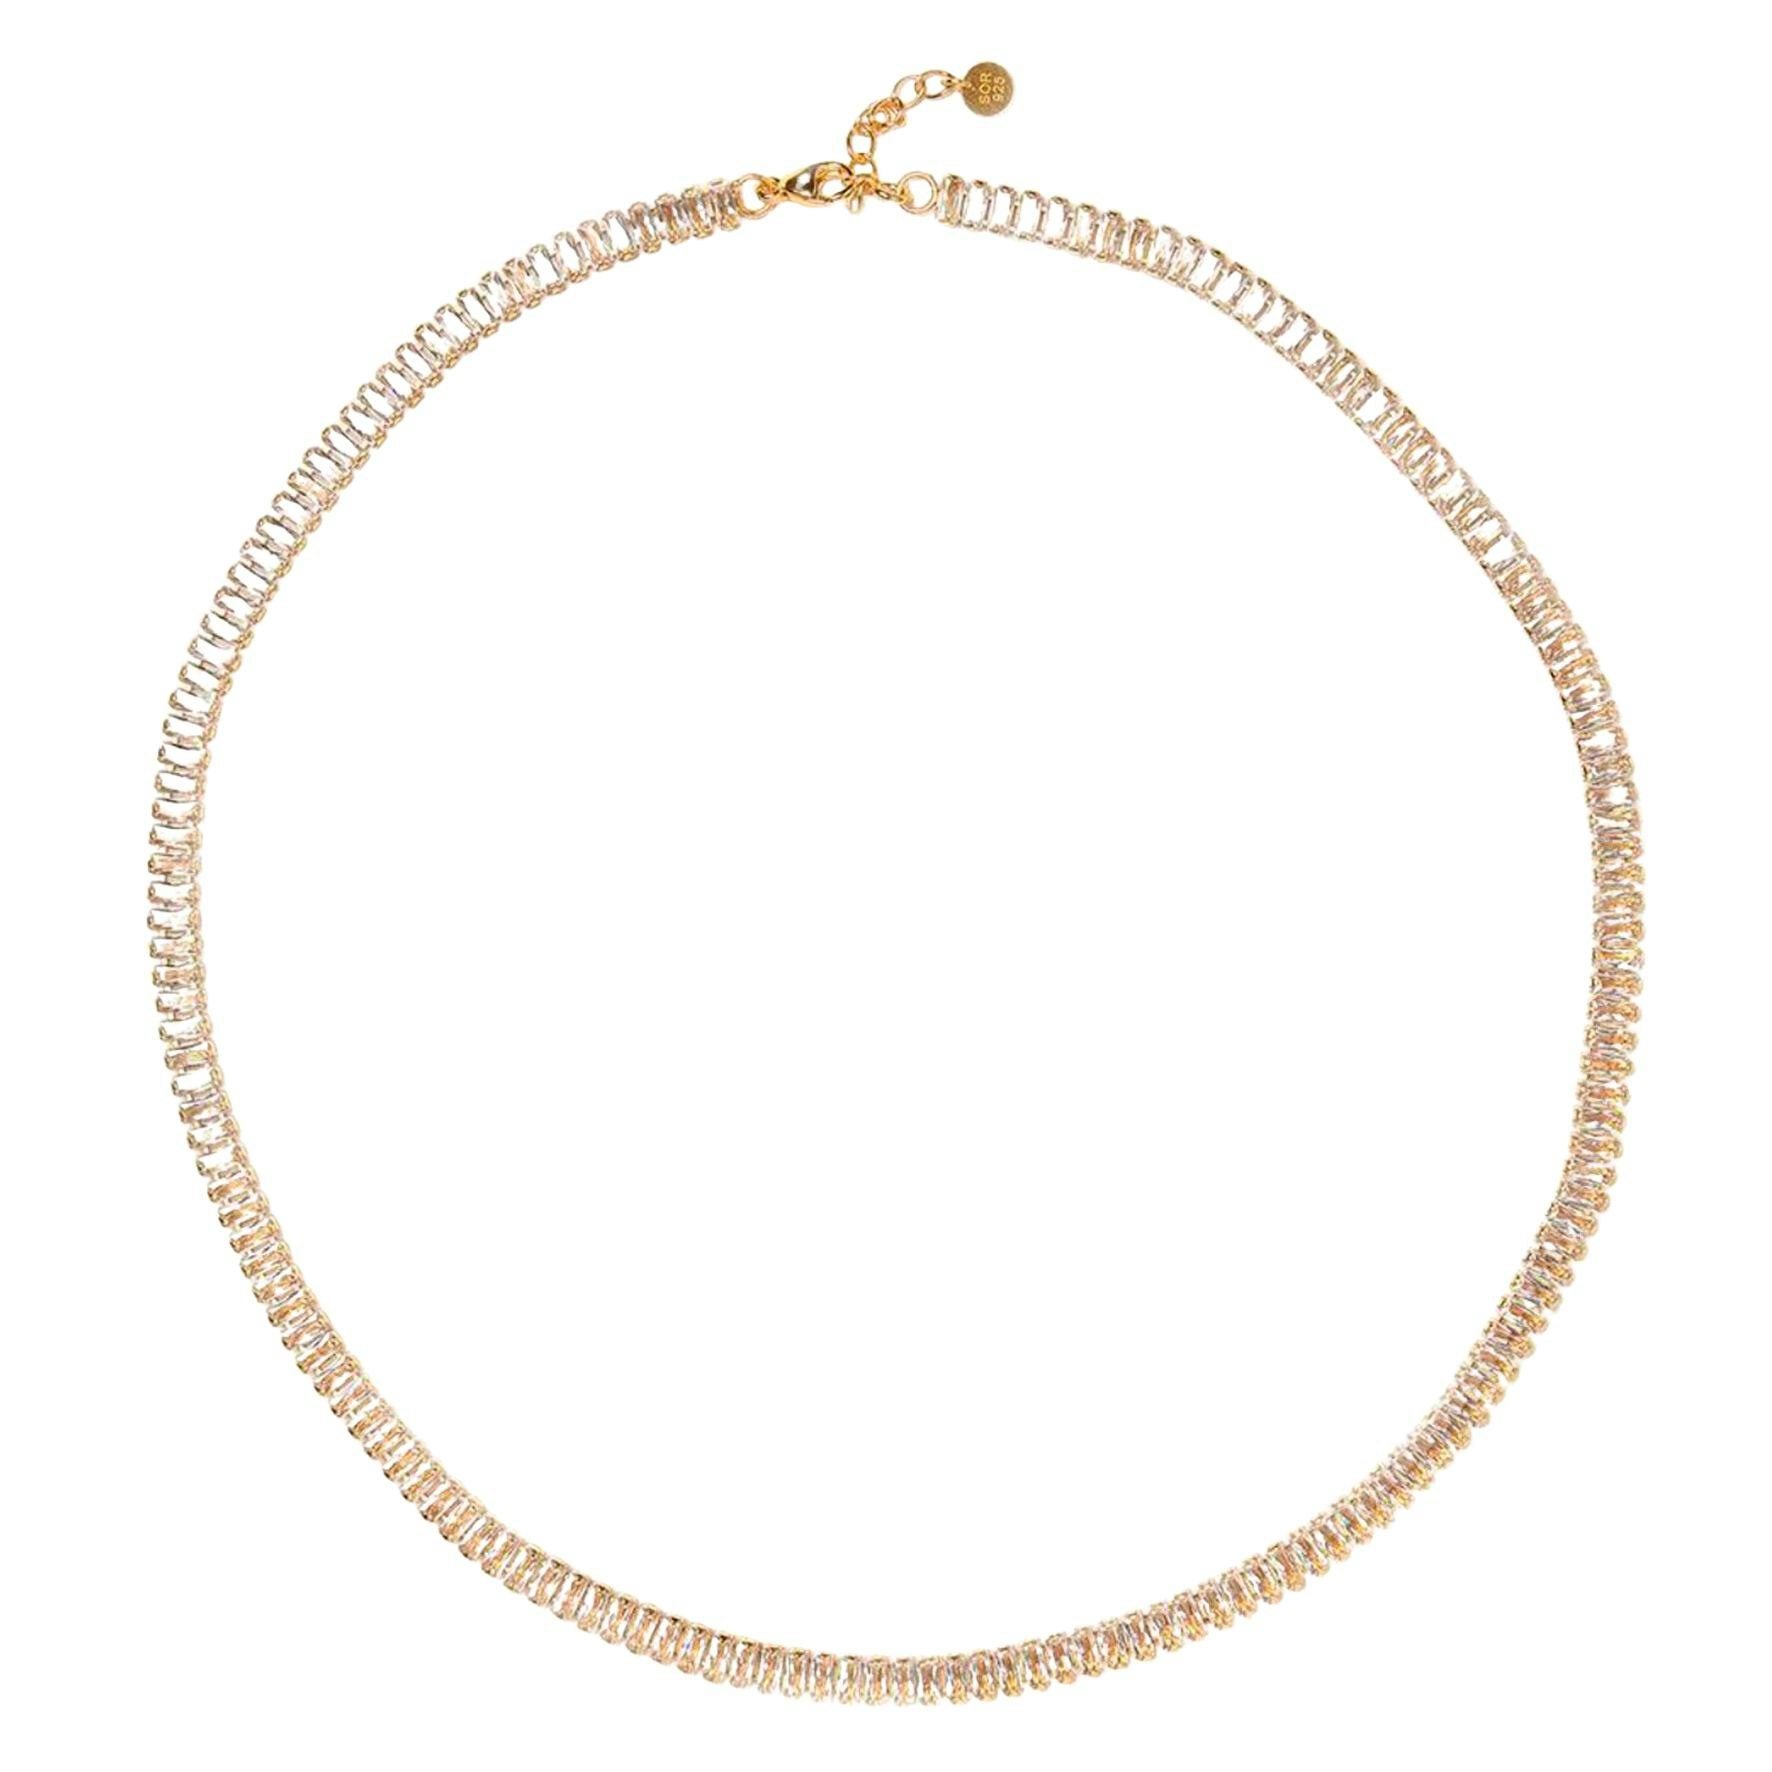 Sirius Necklace from Sorelle Jewellery in Goldplated Silver Sterling 925